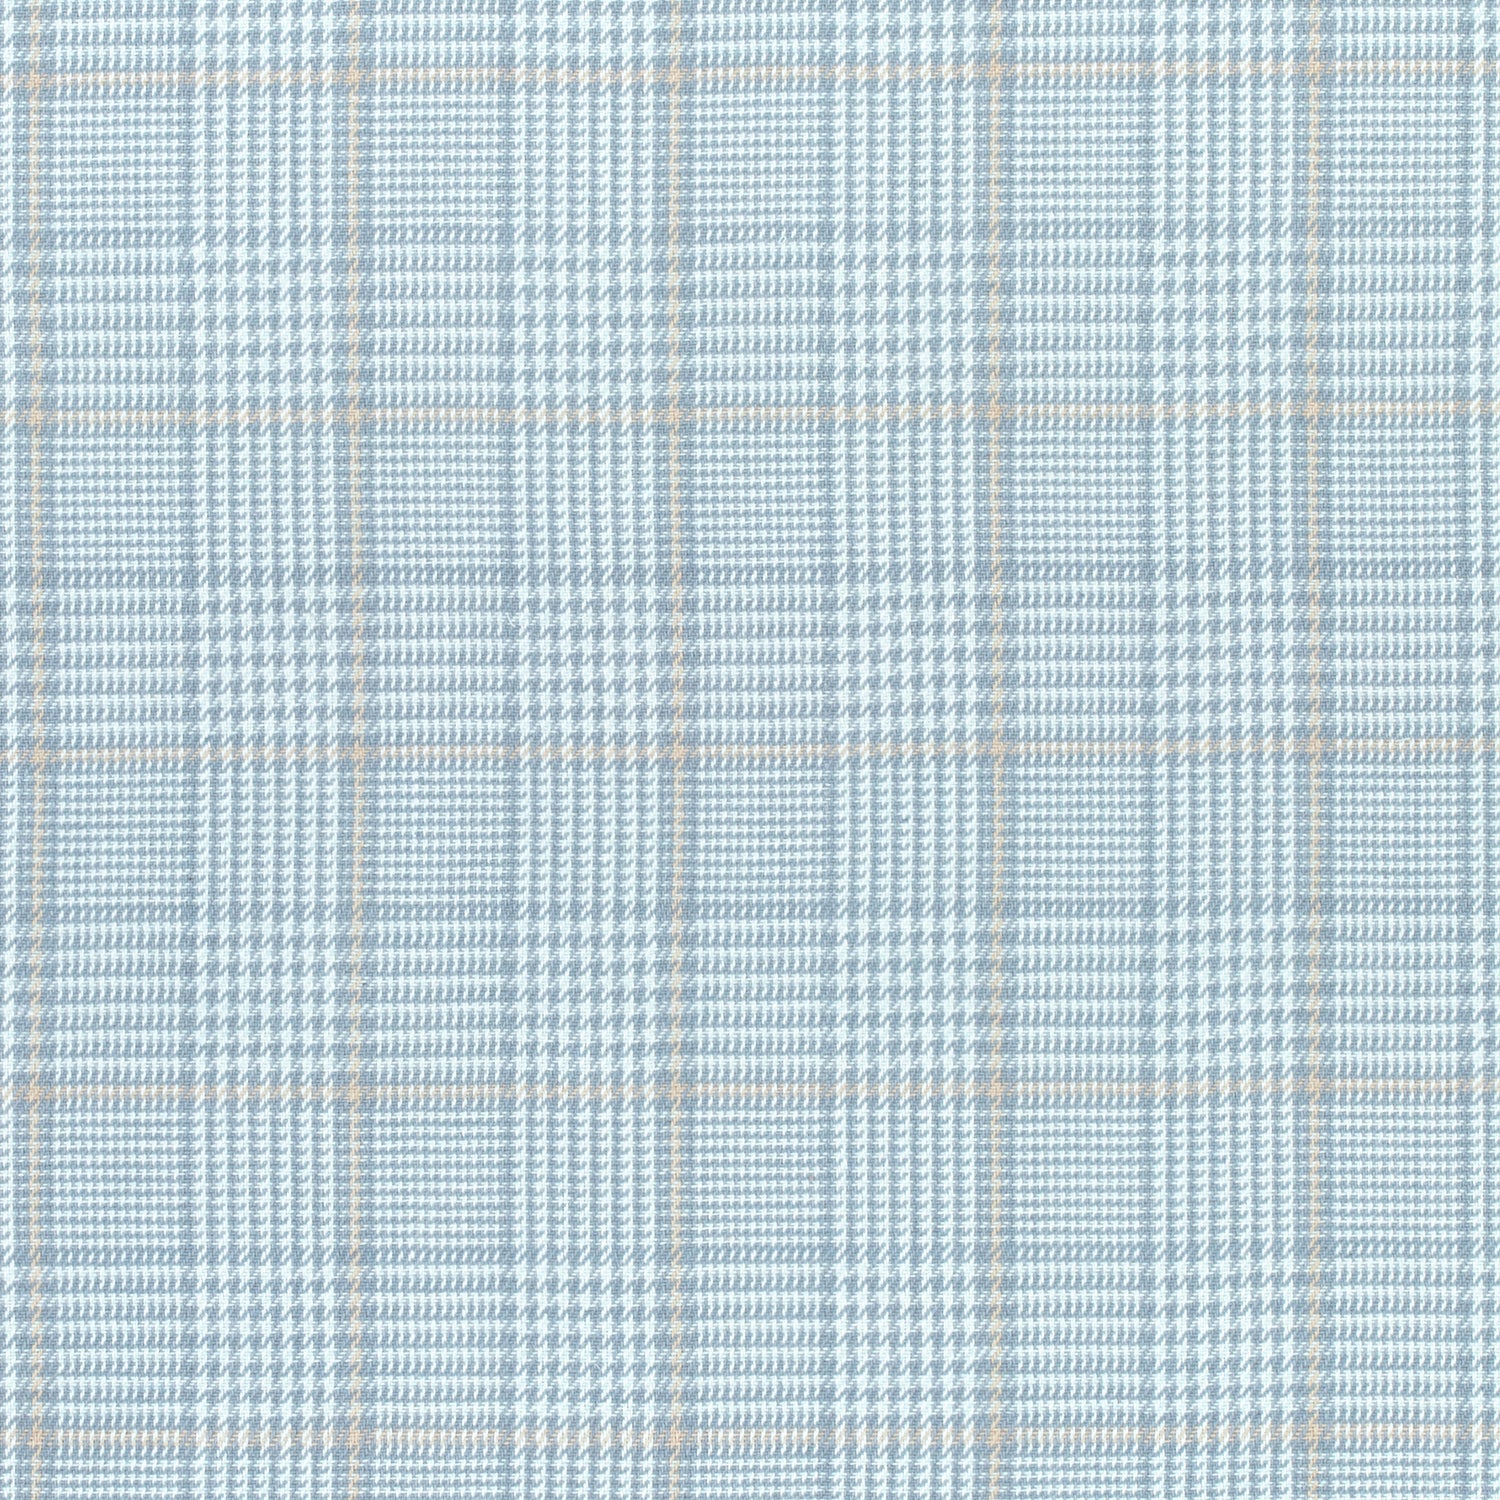 Grassmarket Check fabric in slate blue color - pattern number W710203 - by Thibaut in the Colony collection